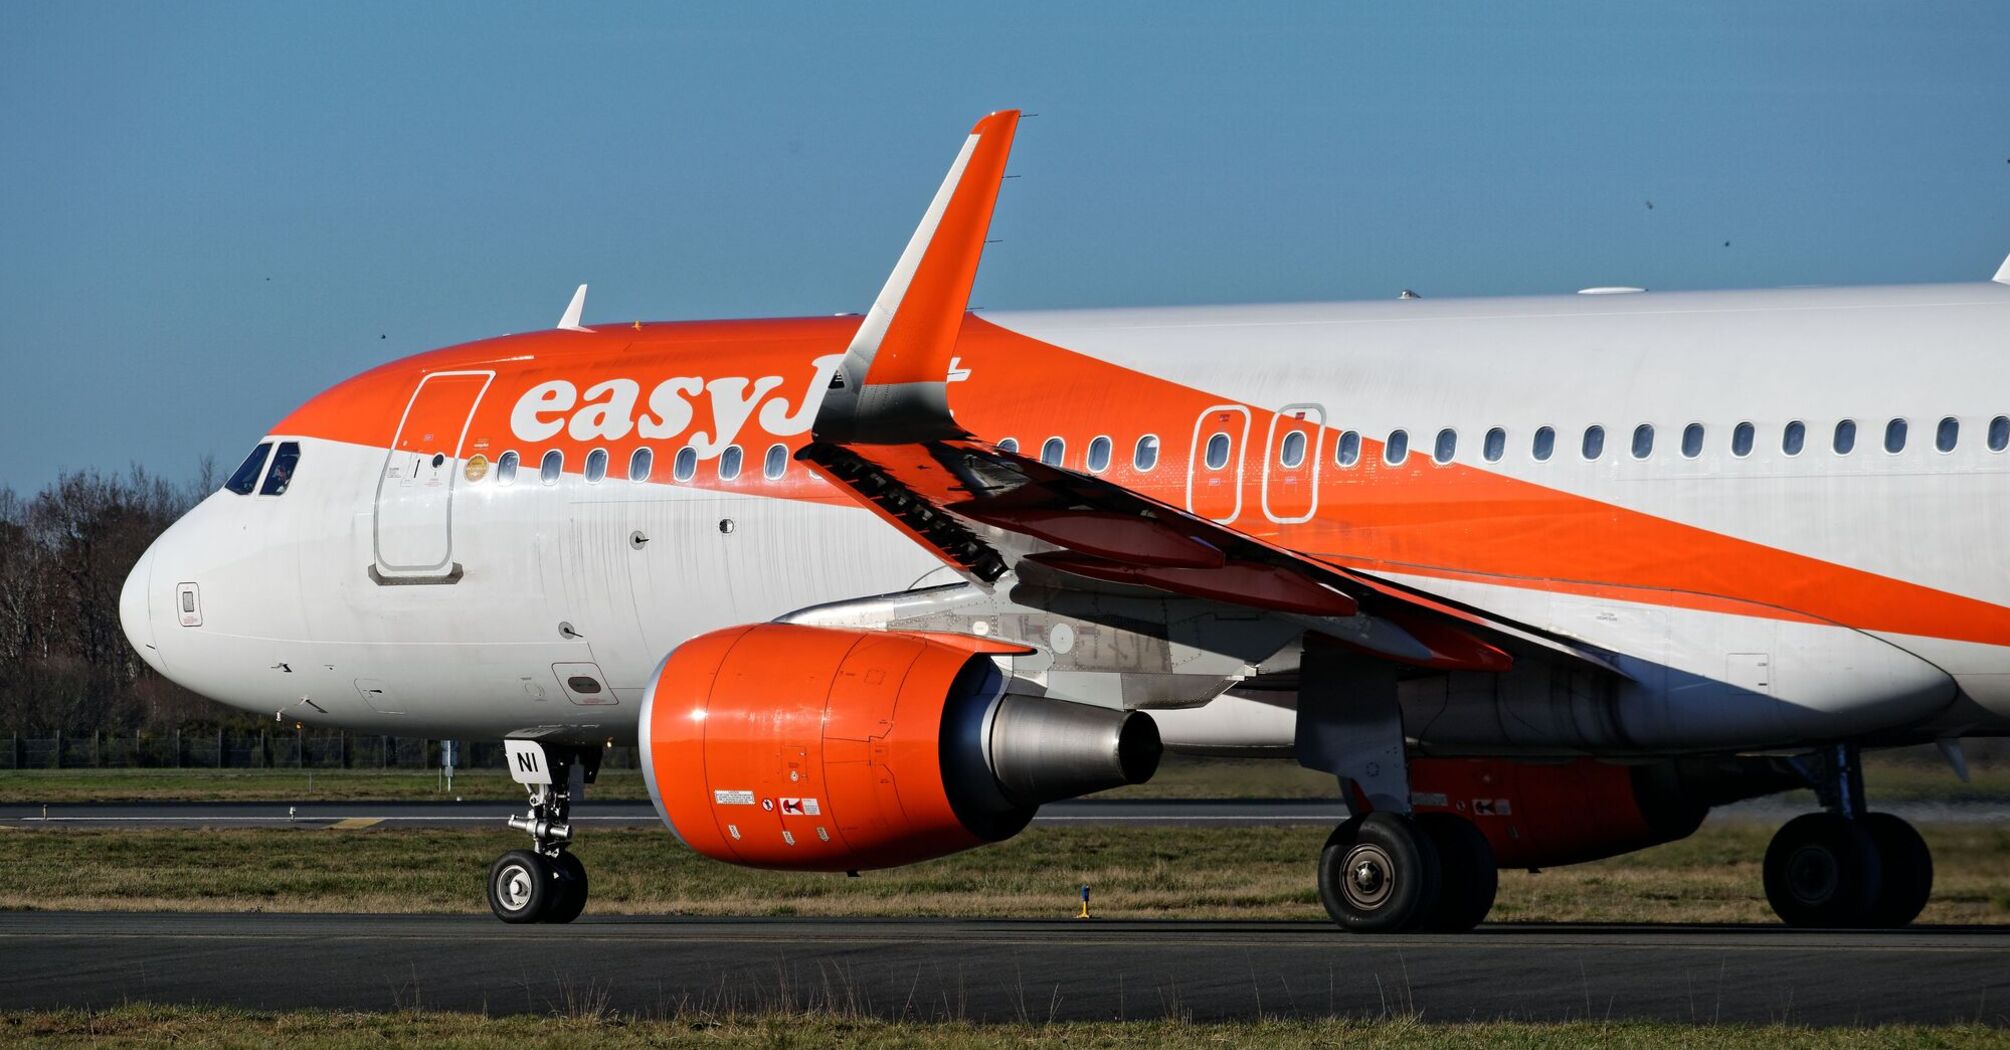 The passenger of EasyJet airline was denied boarding due to a mistake by the staff